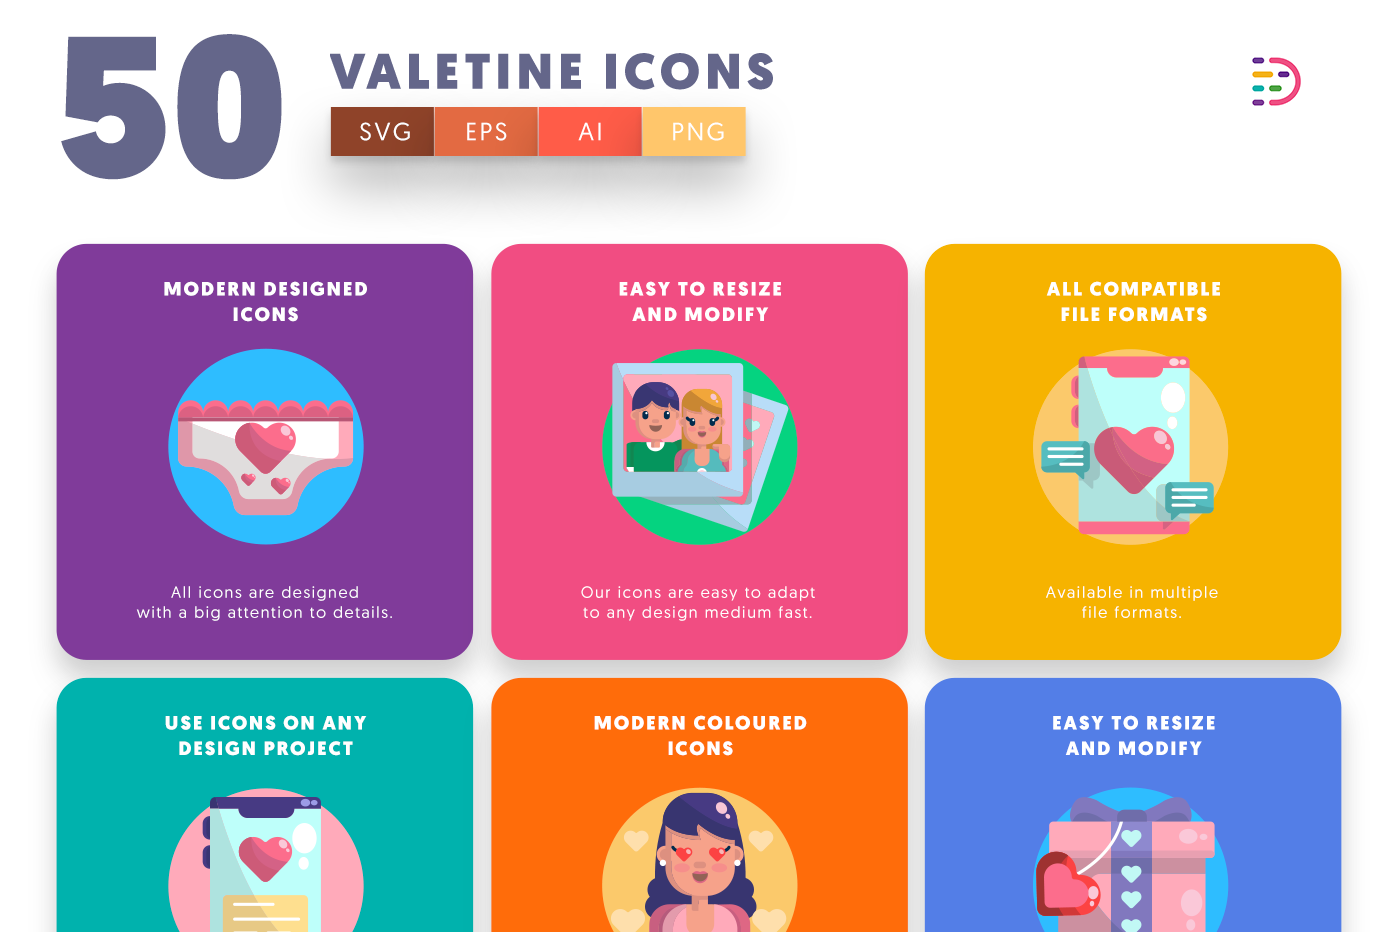 Simple style Valentines Icons